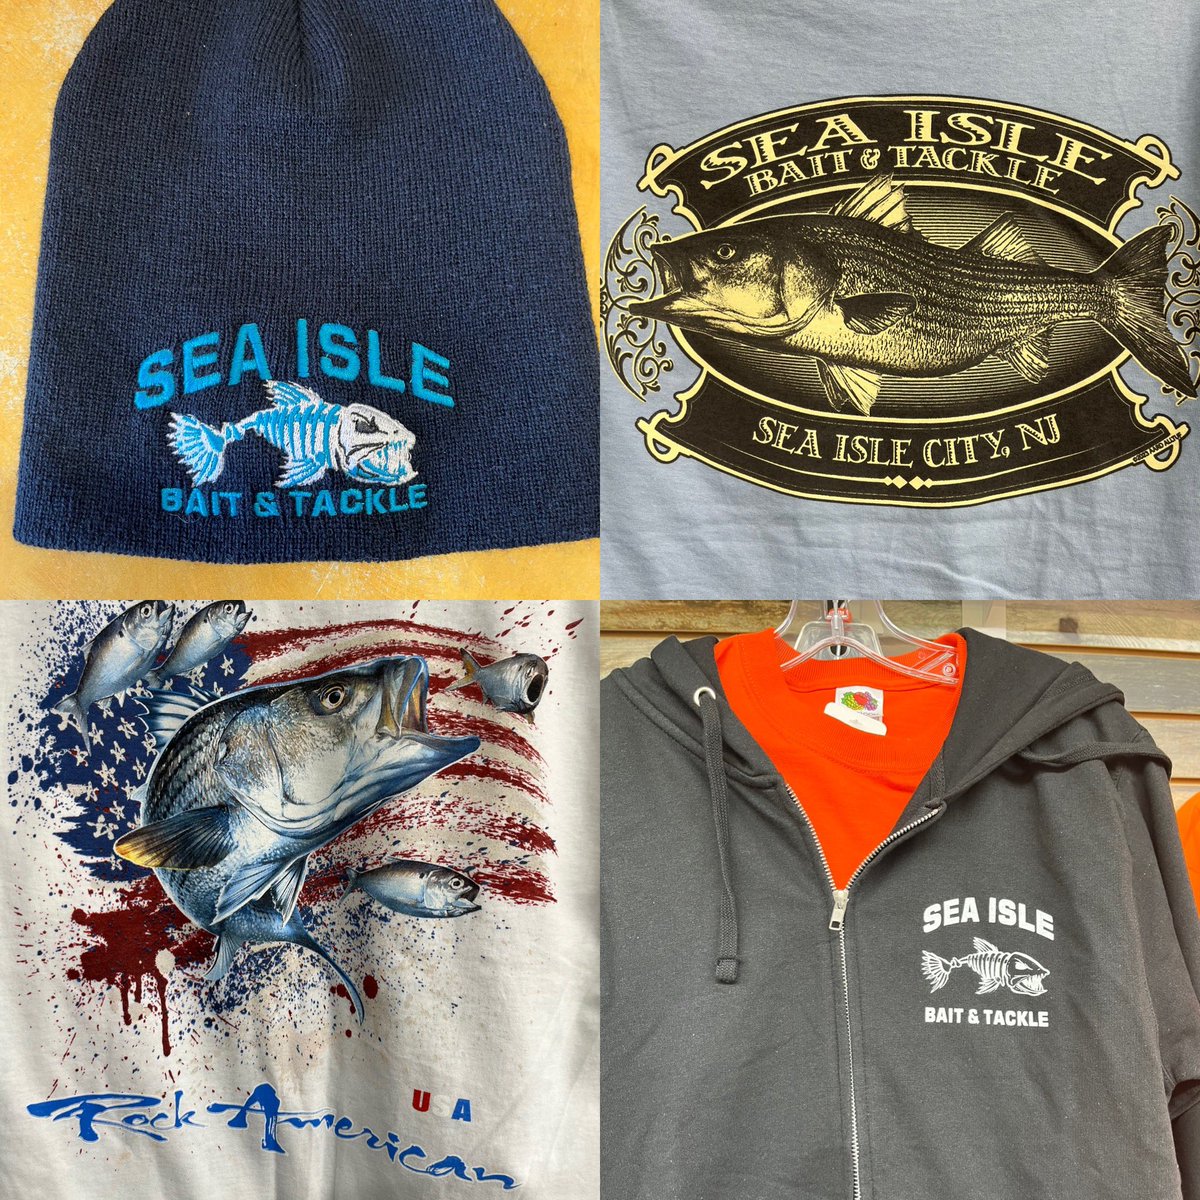 Loaded with new apparel. Can’t come in we ship. #seaislebaitandtackle #seaislebait #avalon #avalonnj #seaislecity #seaislecitynj #shopsmall #smallbusiness #shoplocal #supportsmallbusiness #newapparel #newhoodie #hoodie #knithat #newhat #tshirts #fishingshirt #WeAreBack